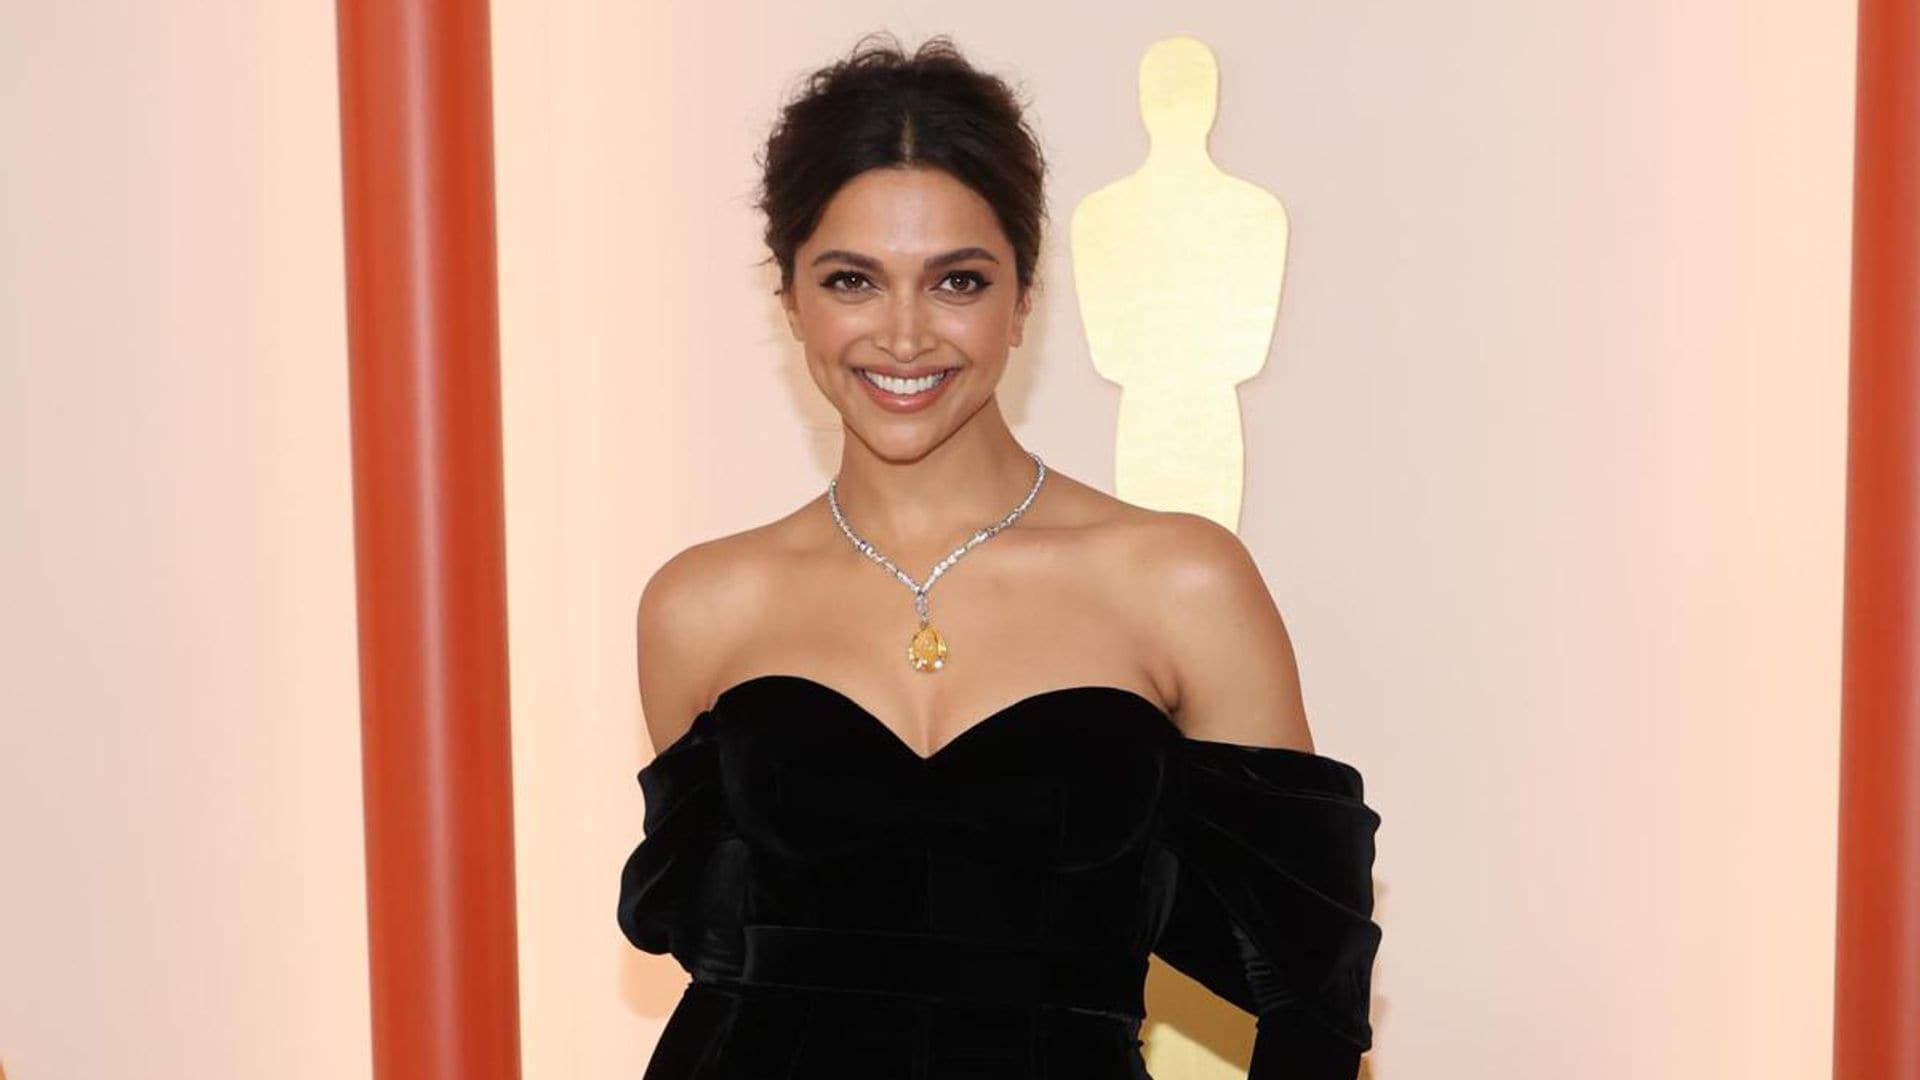 Camila Alves McConaughey shares adorable video with her mother in law